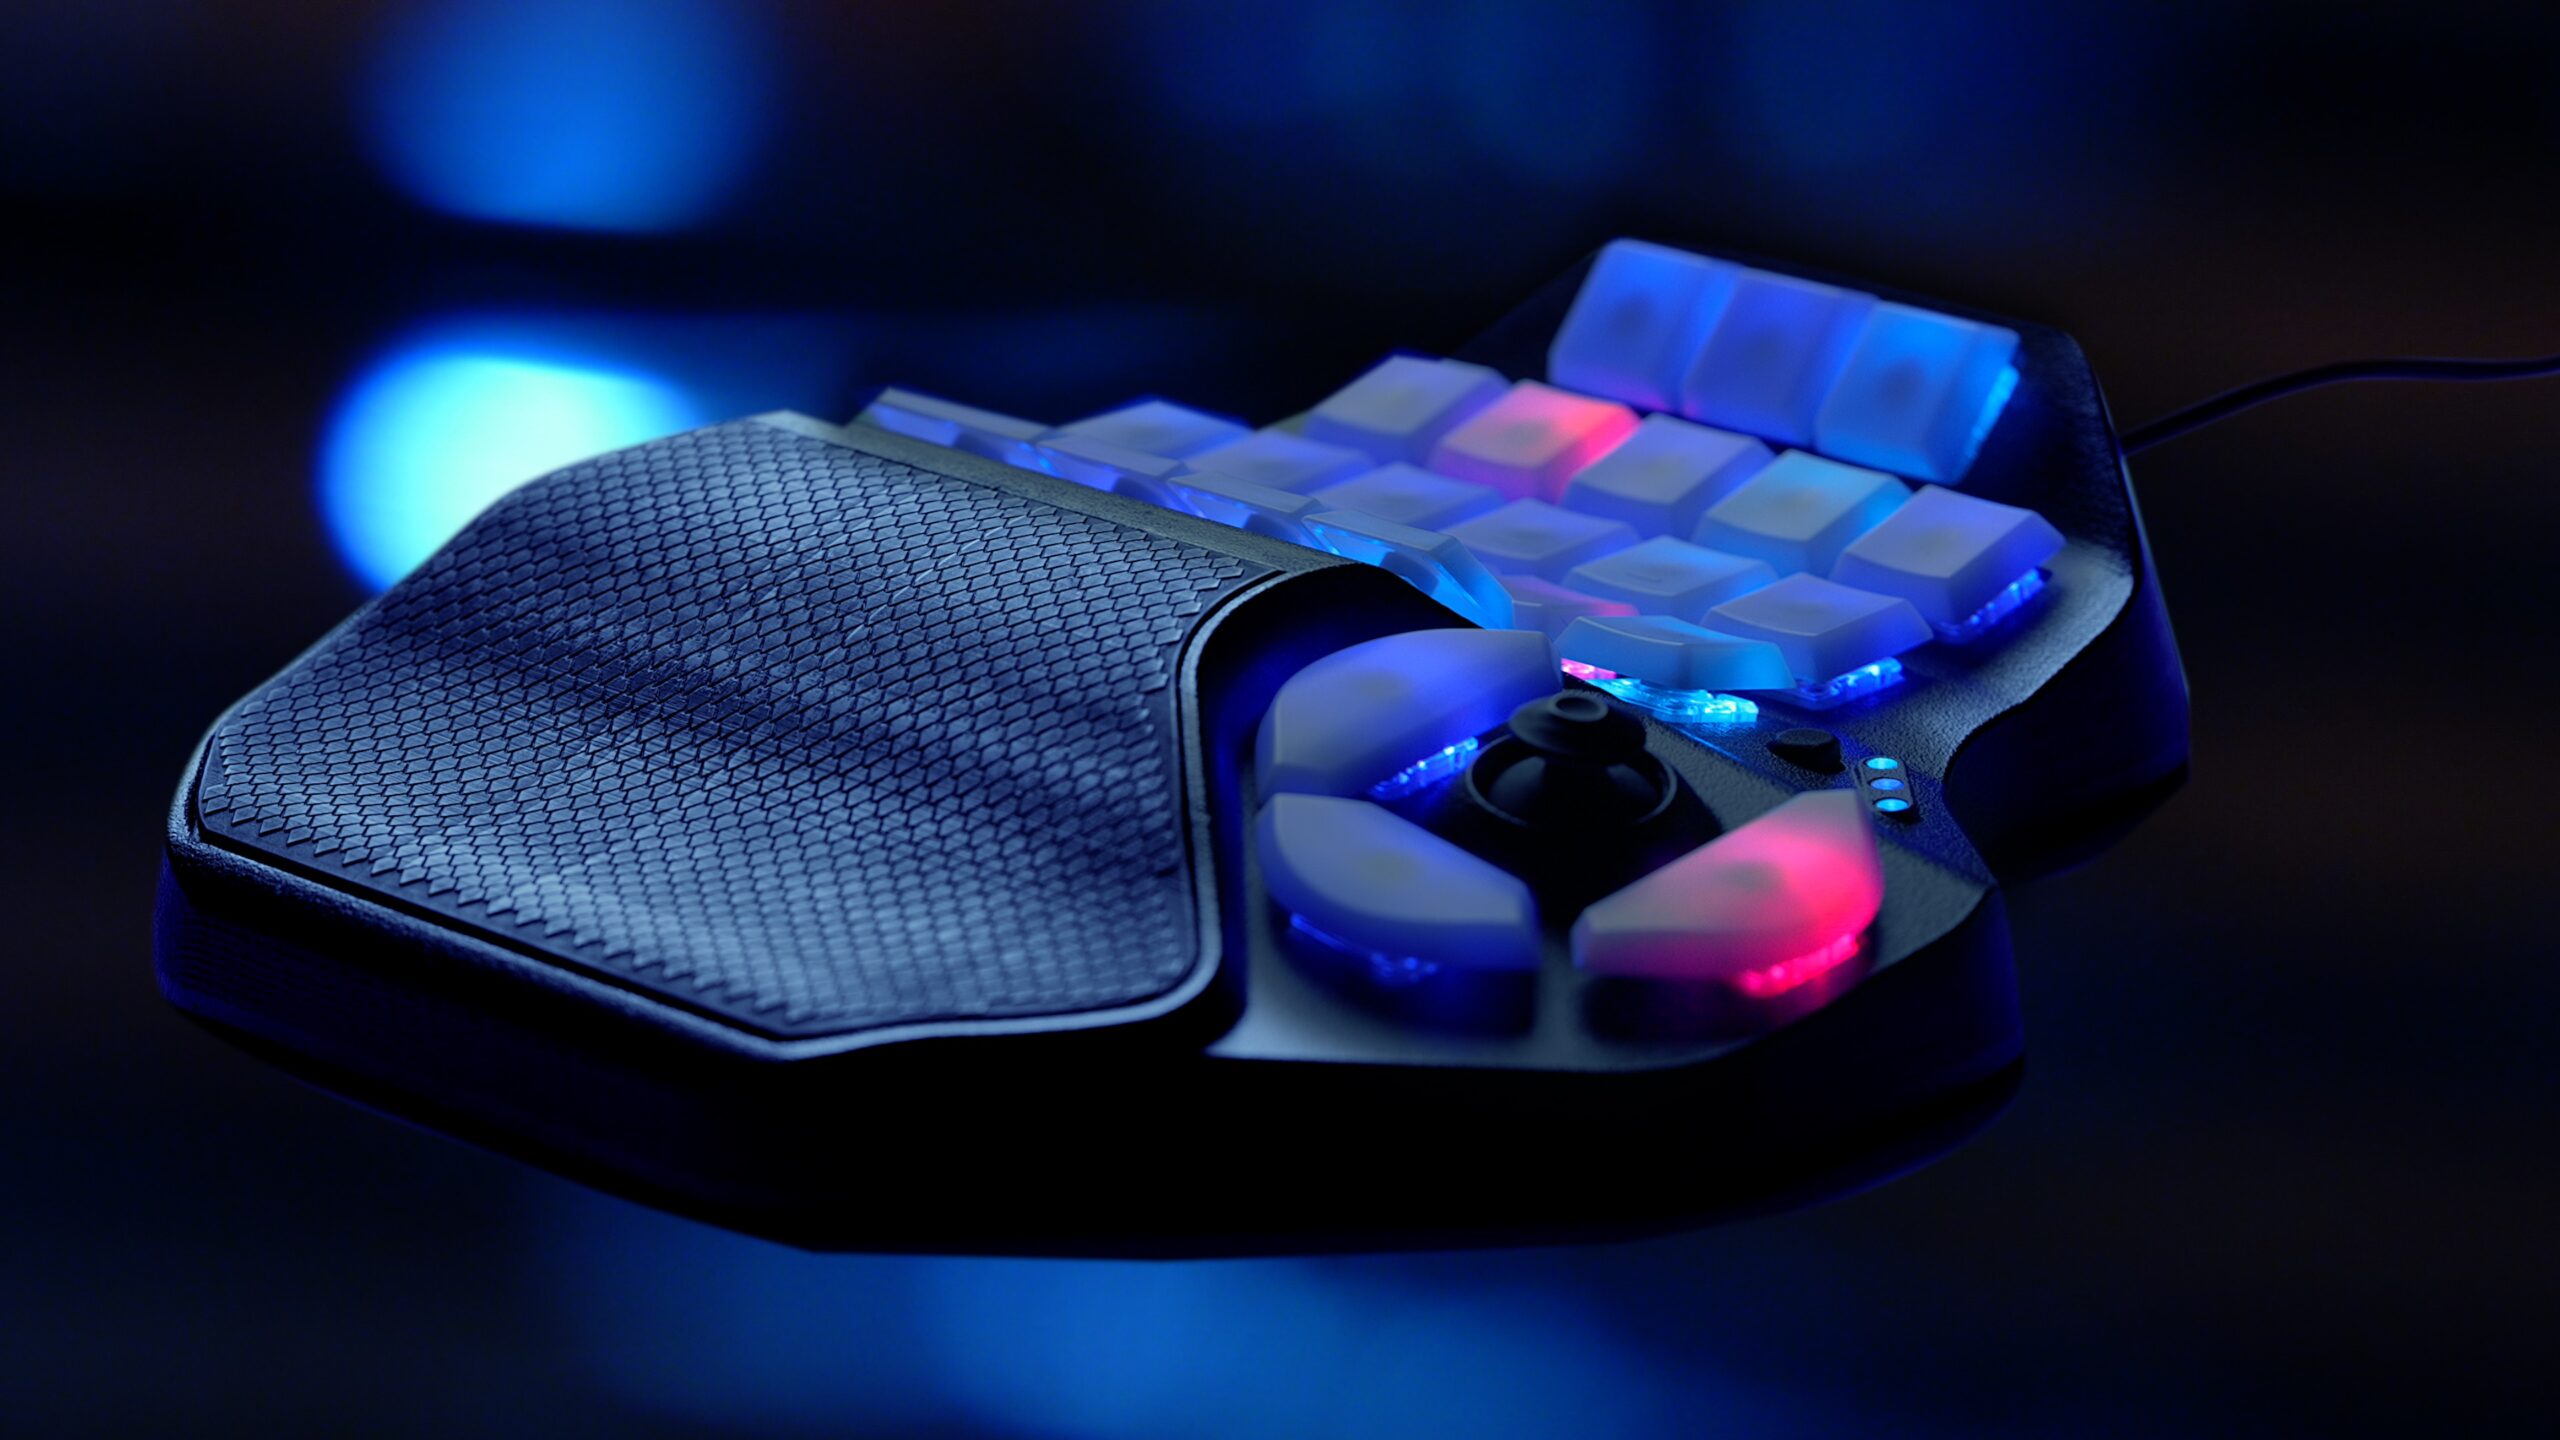 SideQuest is a competitive alternative to traditional keyboards. The left-hand keypad offers 26 programmable keys, a full motion analog thumbstick, mechanical switches, natural hand contour, customizable macros, and backlit keycaps. 